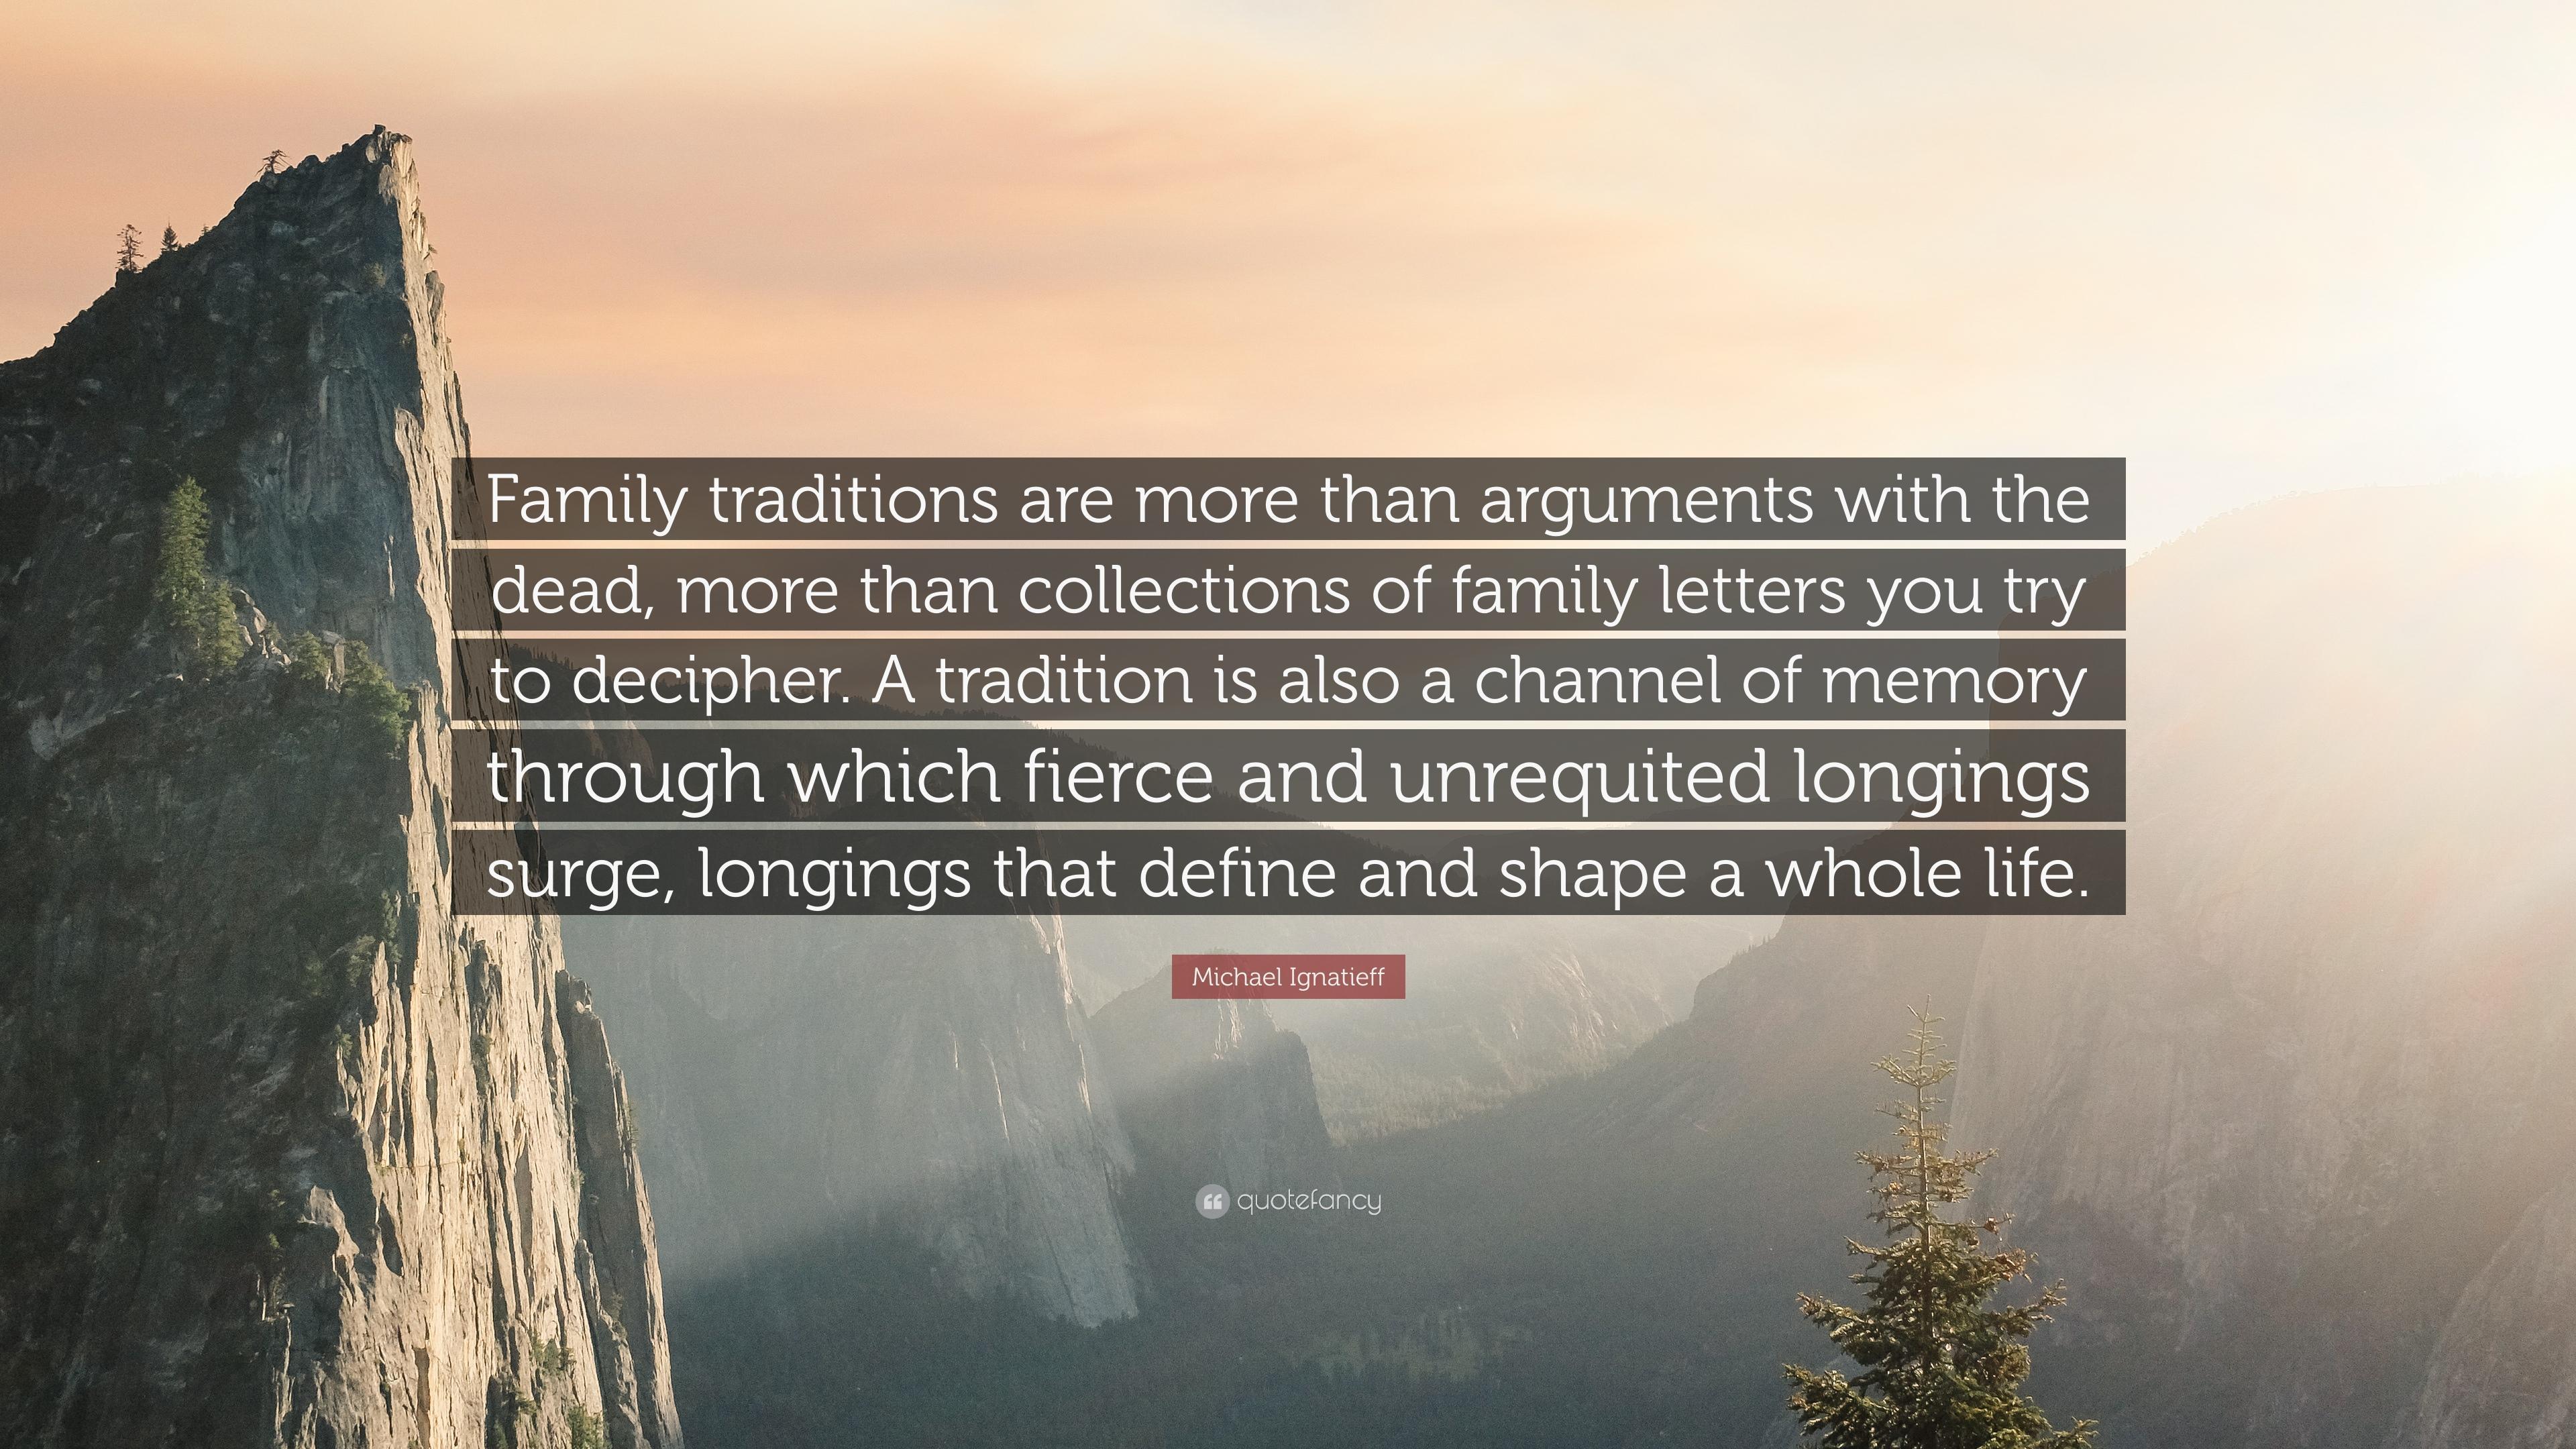 Michael Ignatieff Quote: “Family traditions are more than